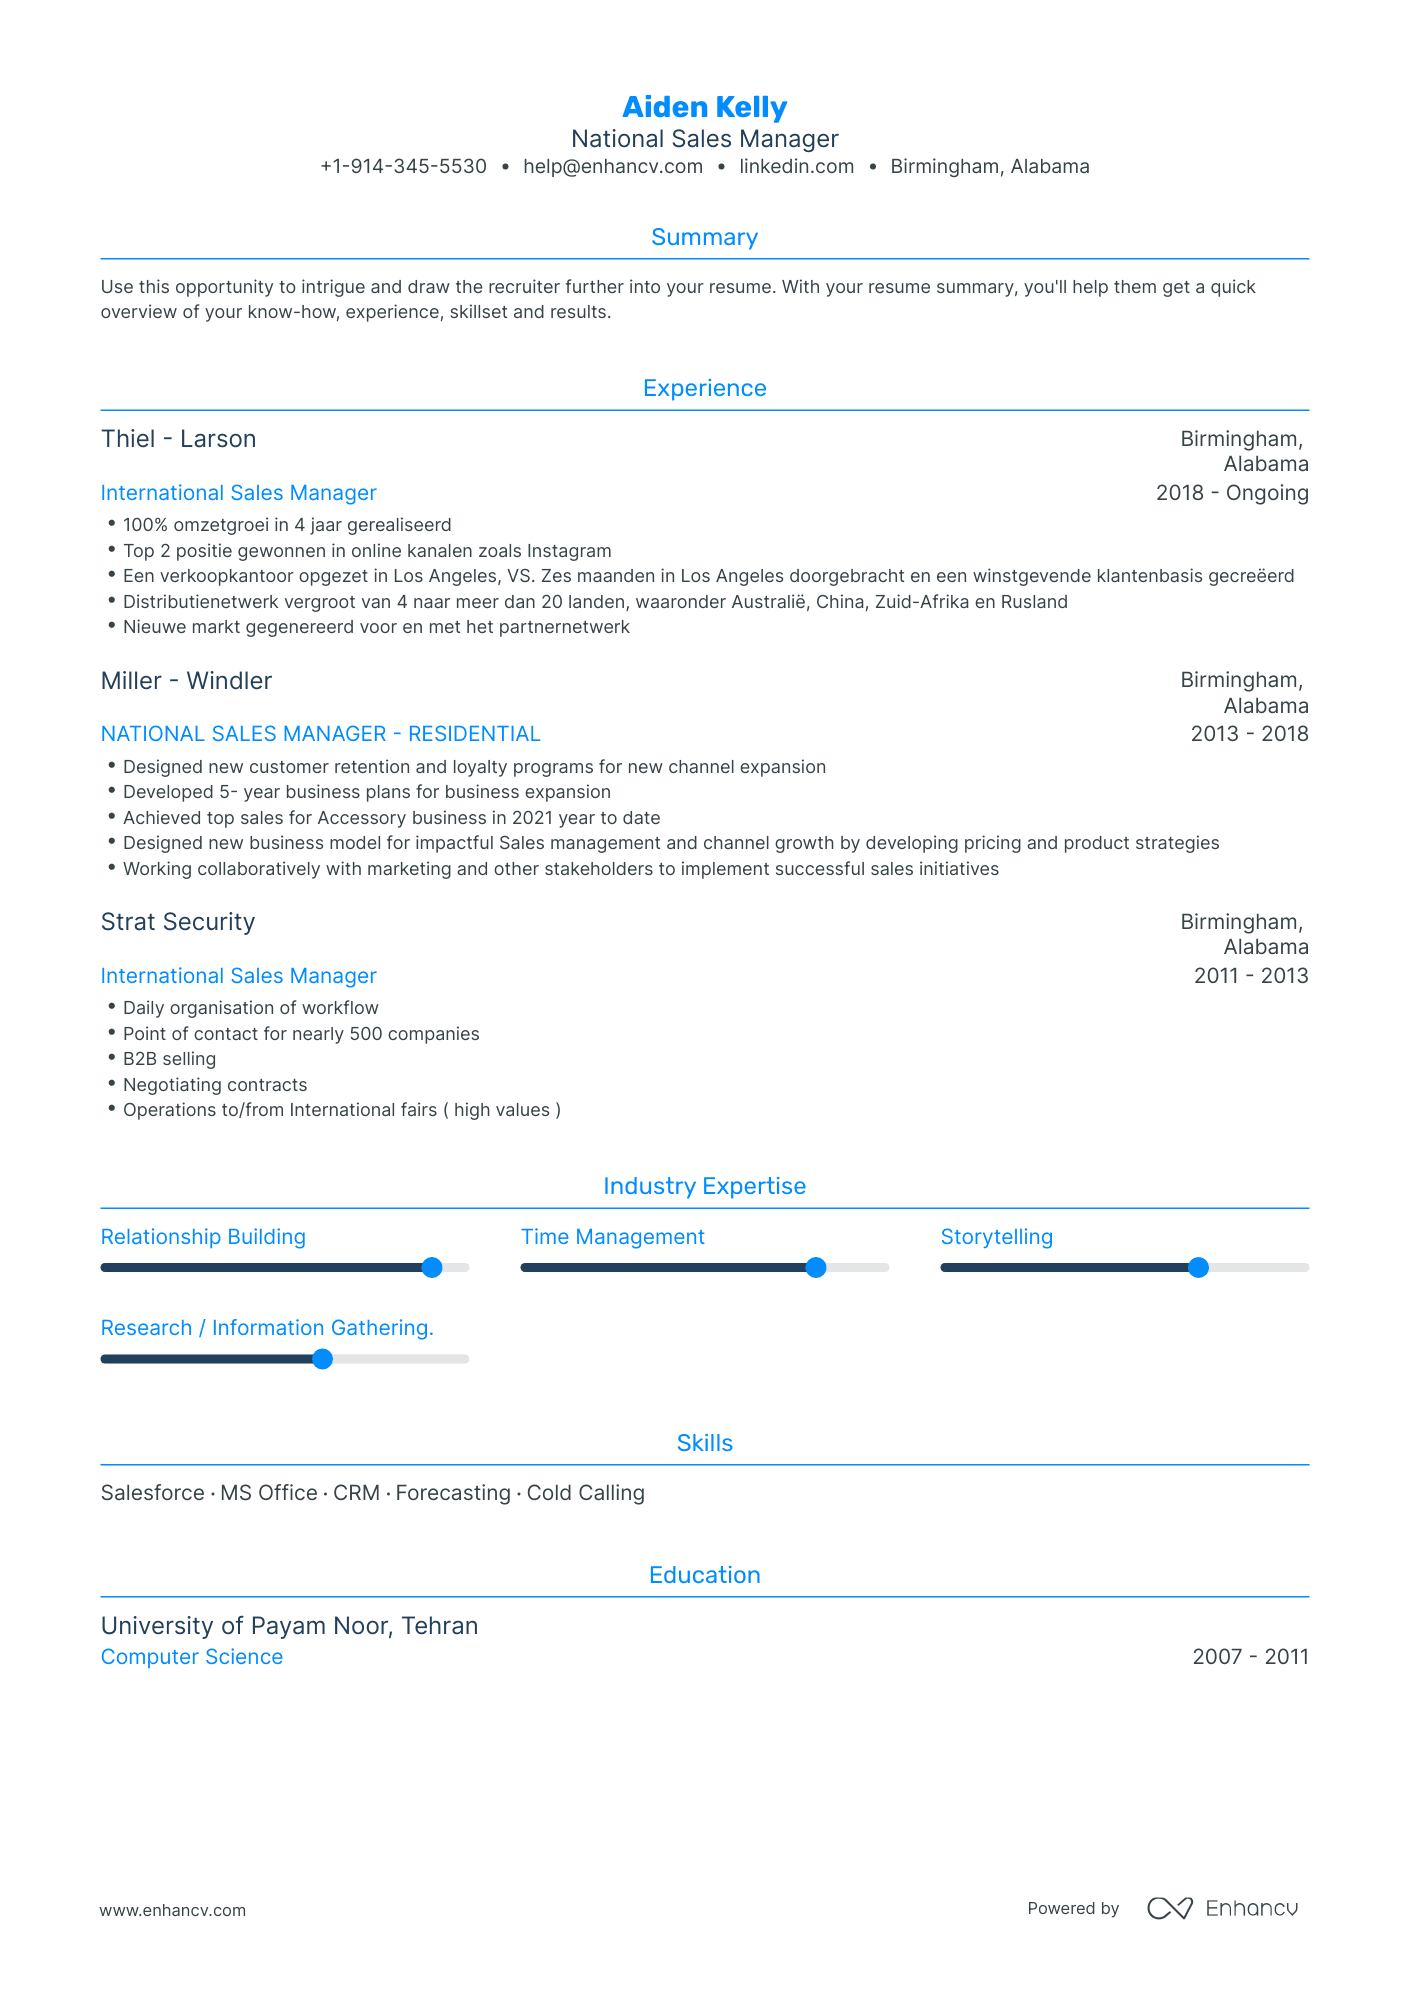 Traditional National Sales Manager Resume Template